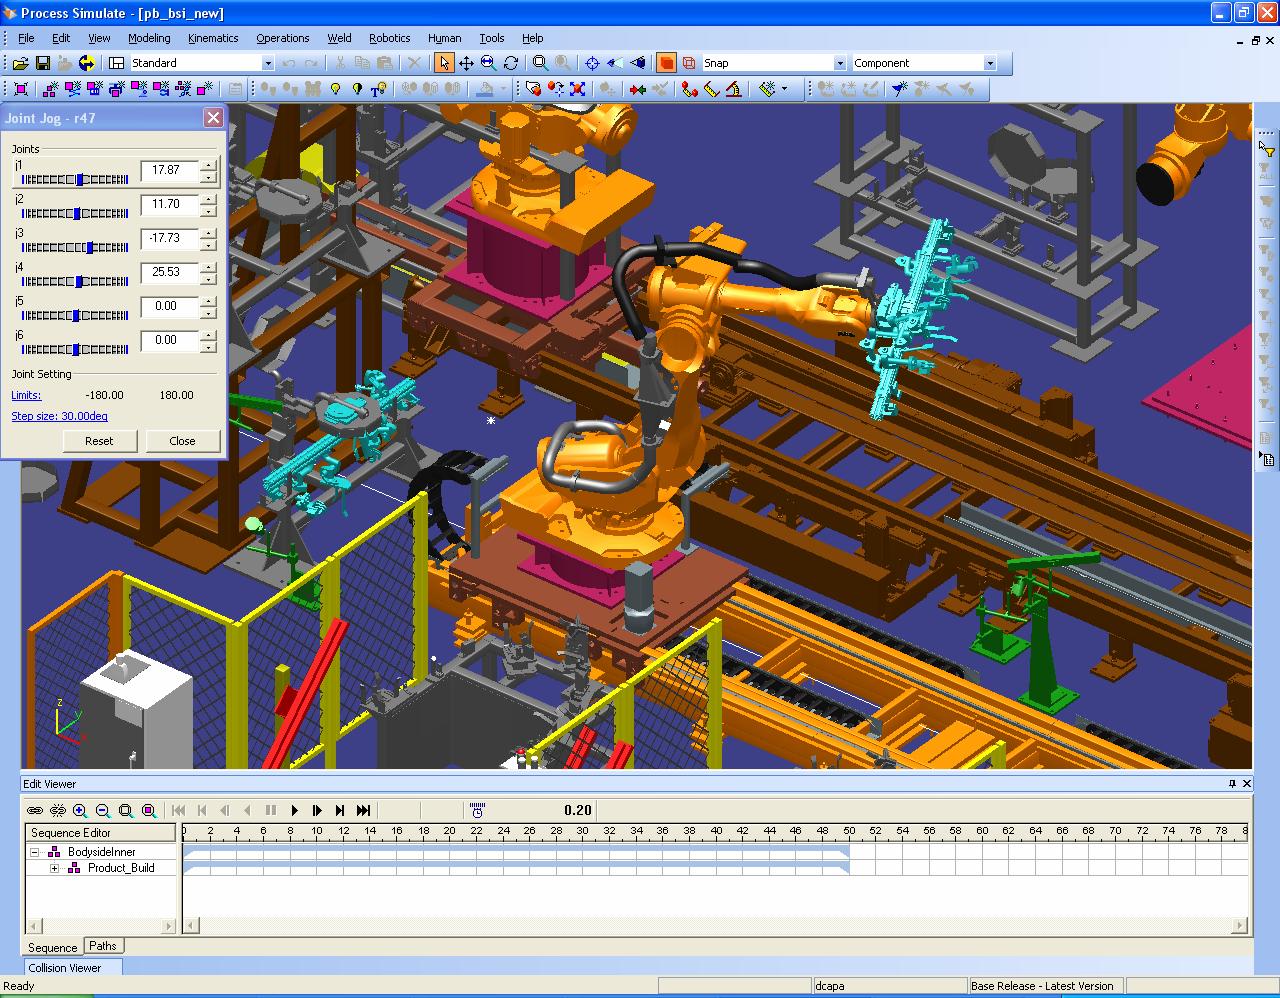 A 3D image of a manufacturing robot in Siemens Process Simulate